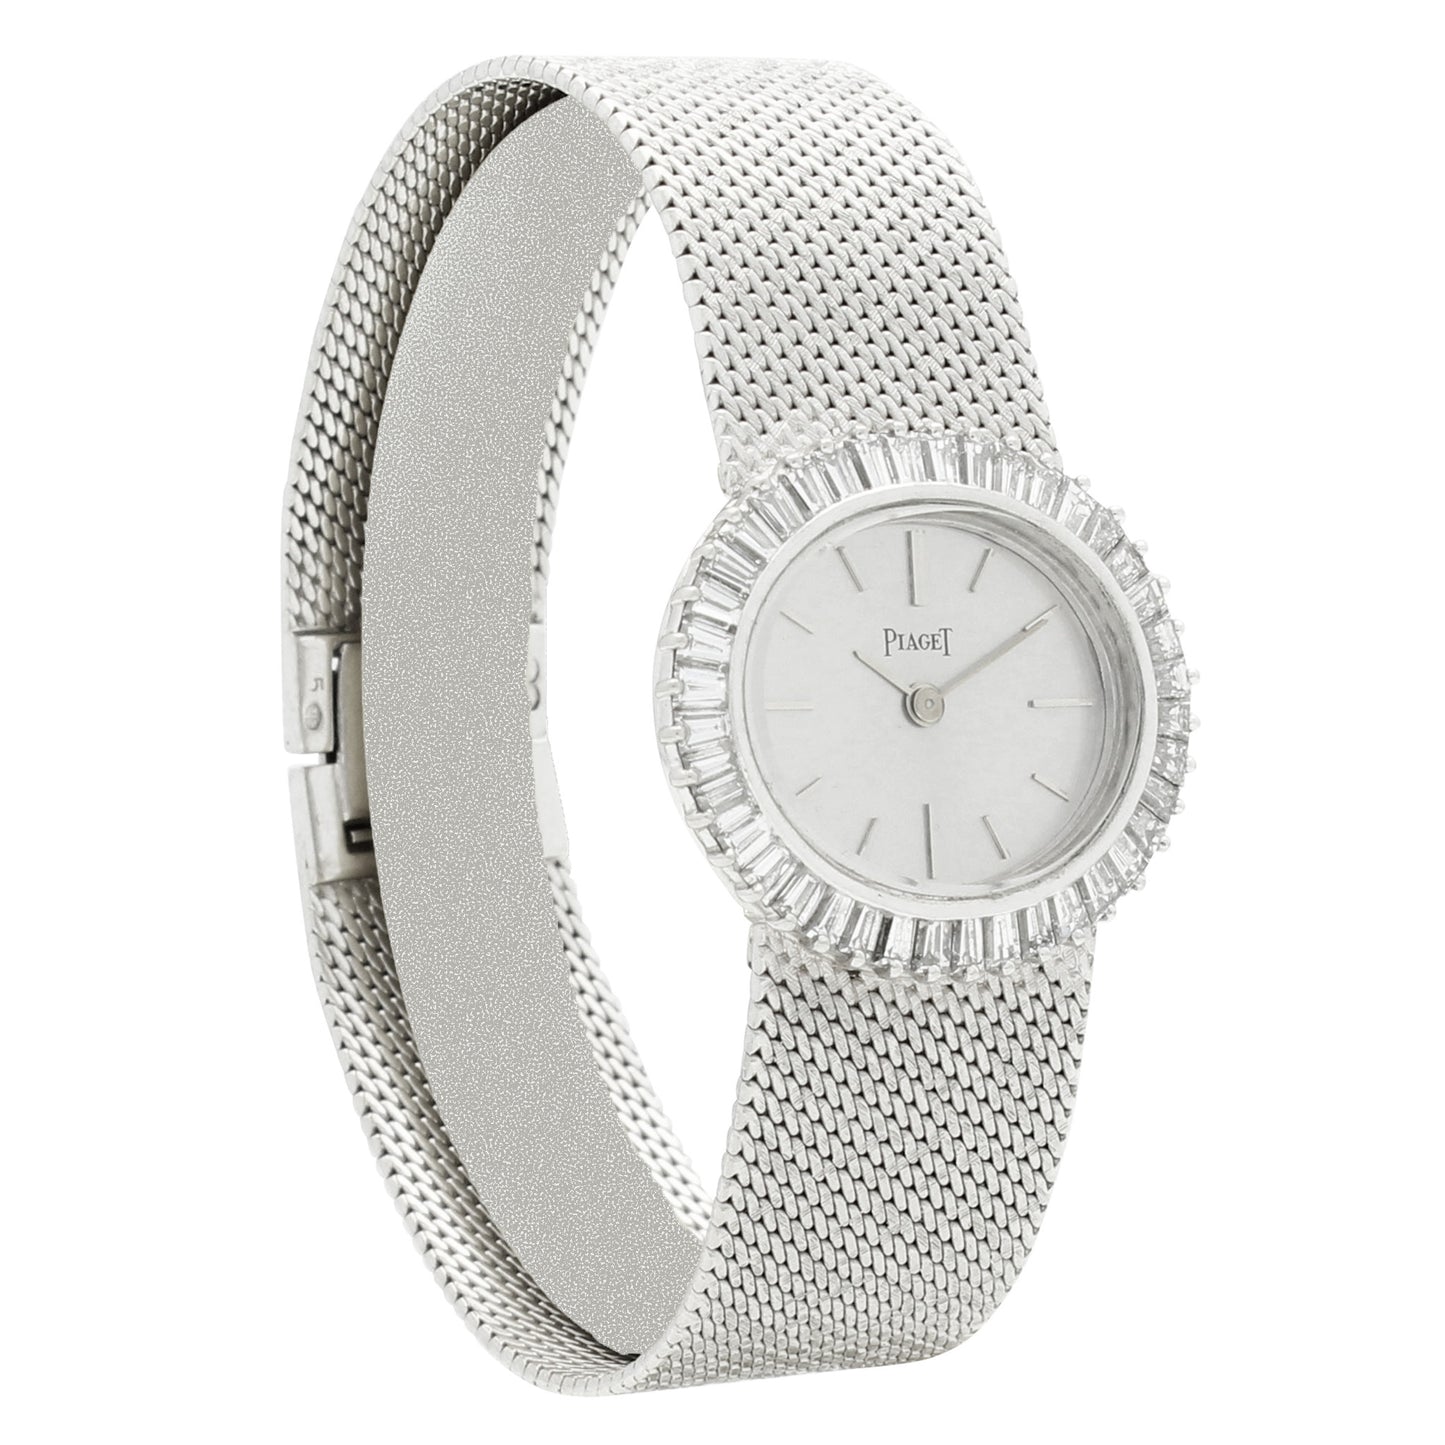 18ct white gold Piaget, reference 9322 'oval cased' and diamond set bezel bracelet watch. Made 1970s